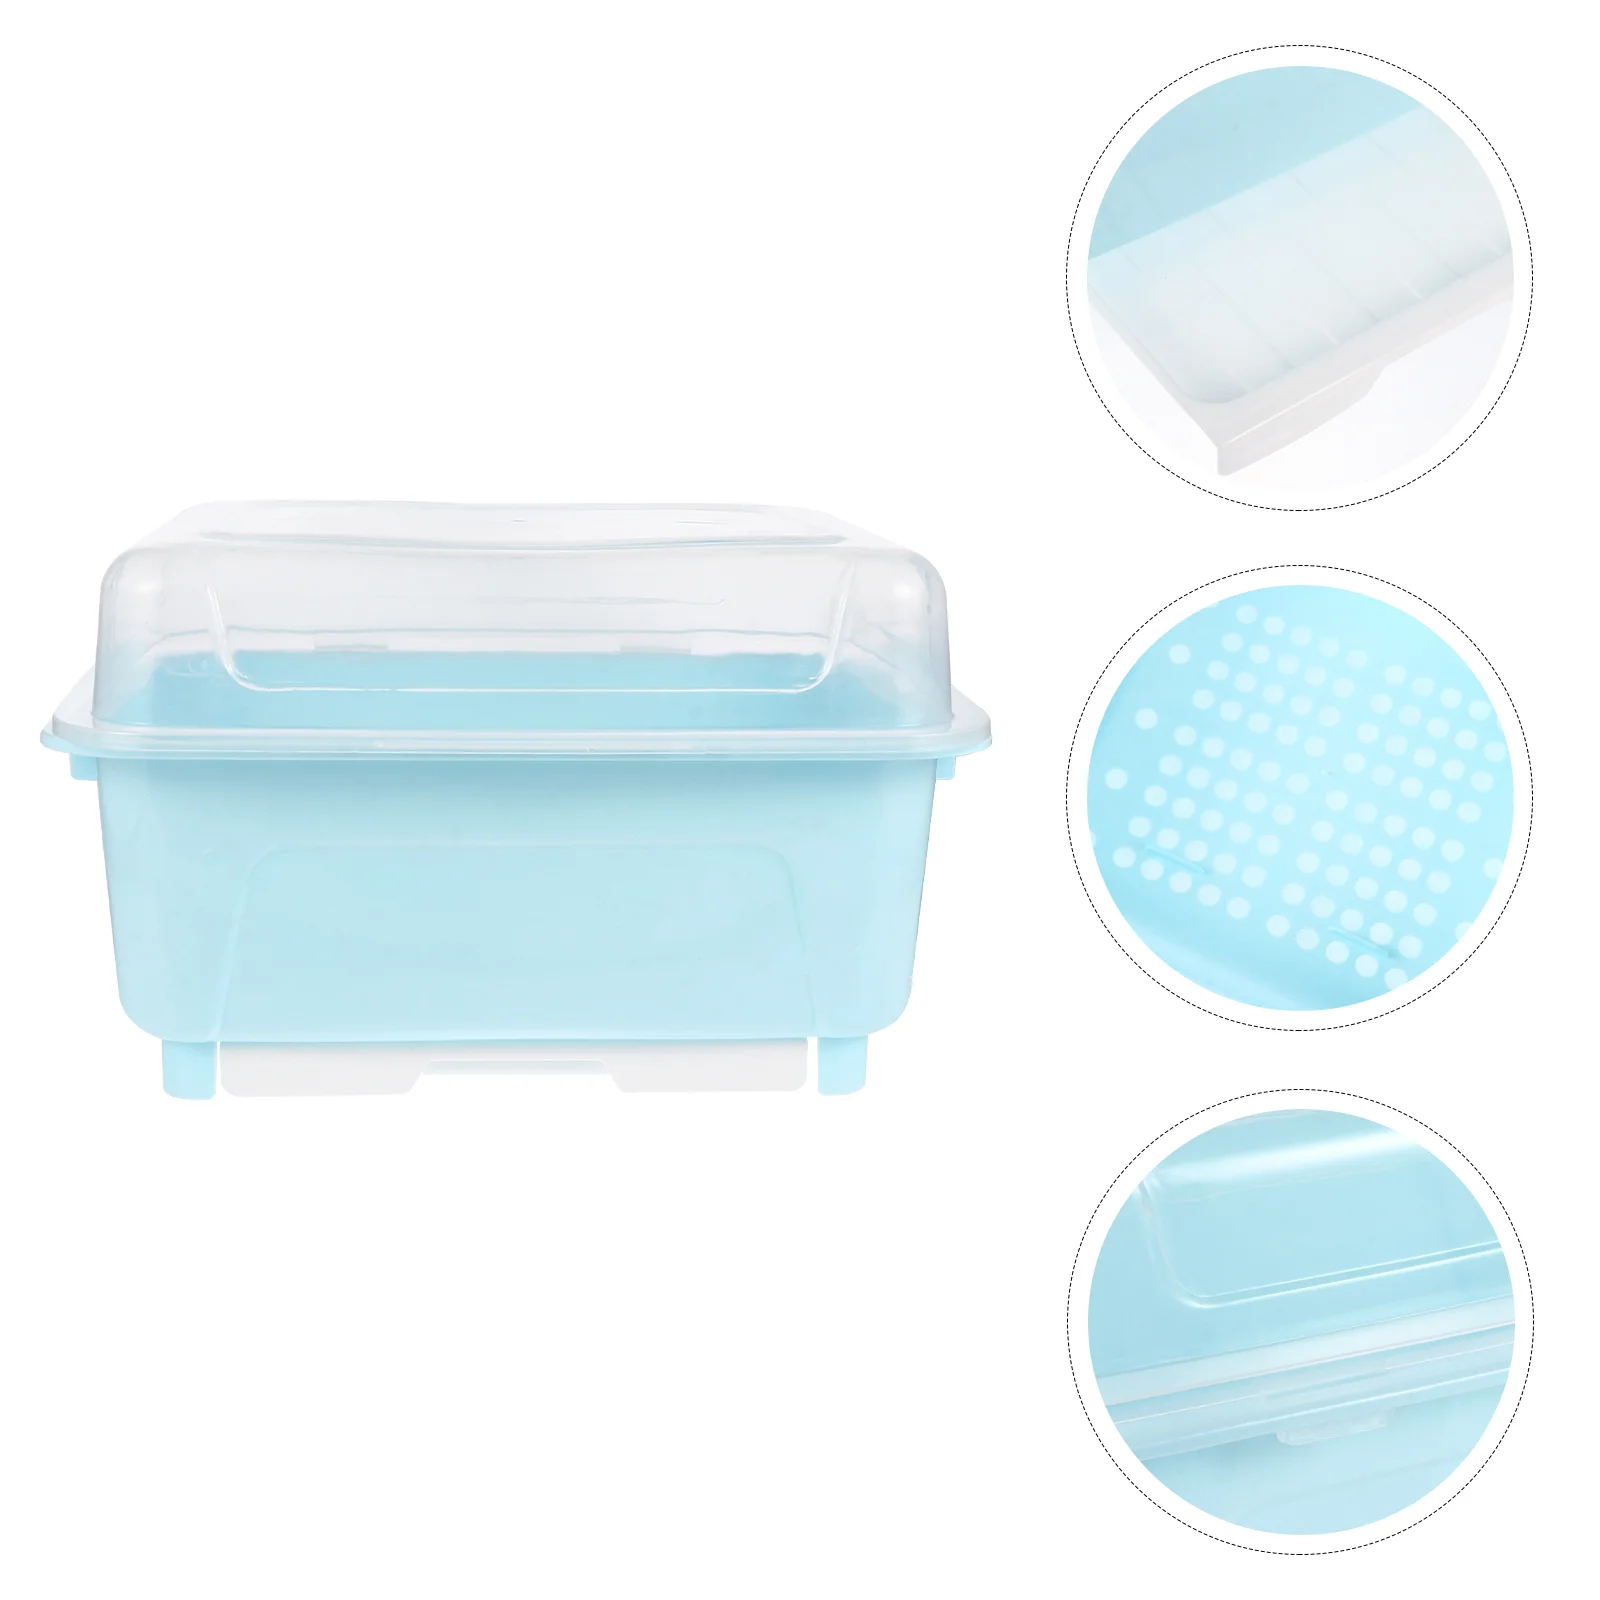 

Utensil Drying Box Lid Cover Dish Drying Rack Drain Board Fork Cutter Spoon Chopstick Holders Caddy Drainer Case